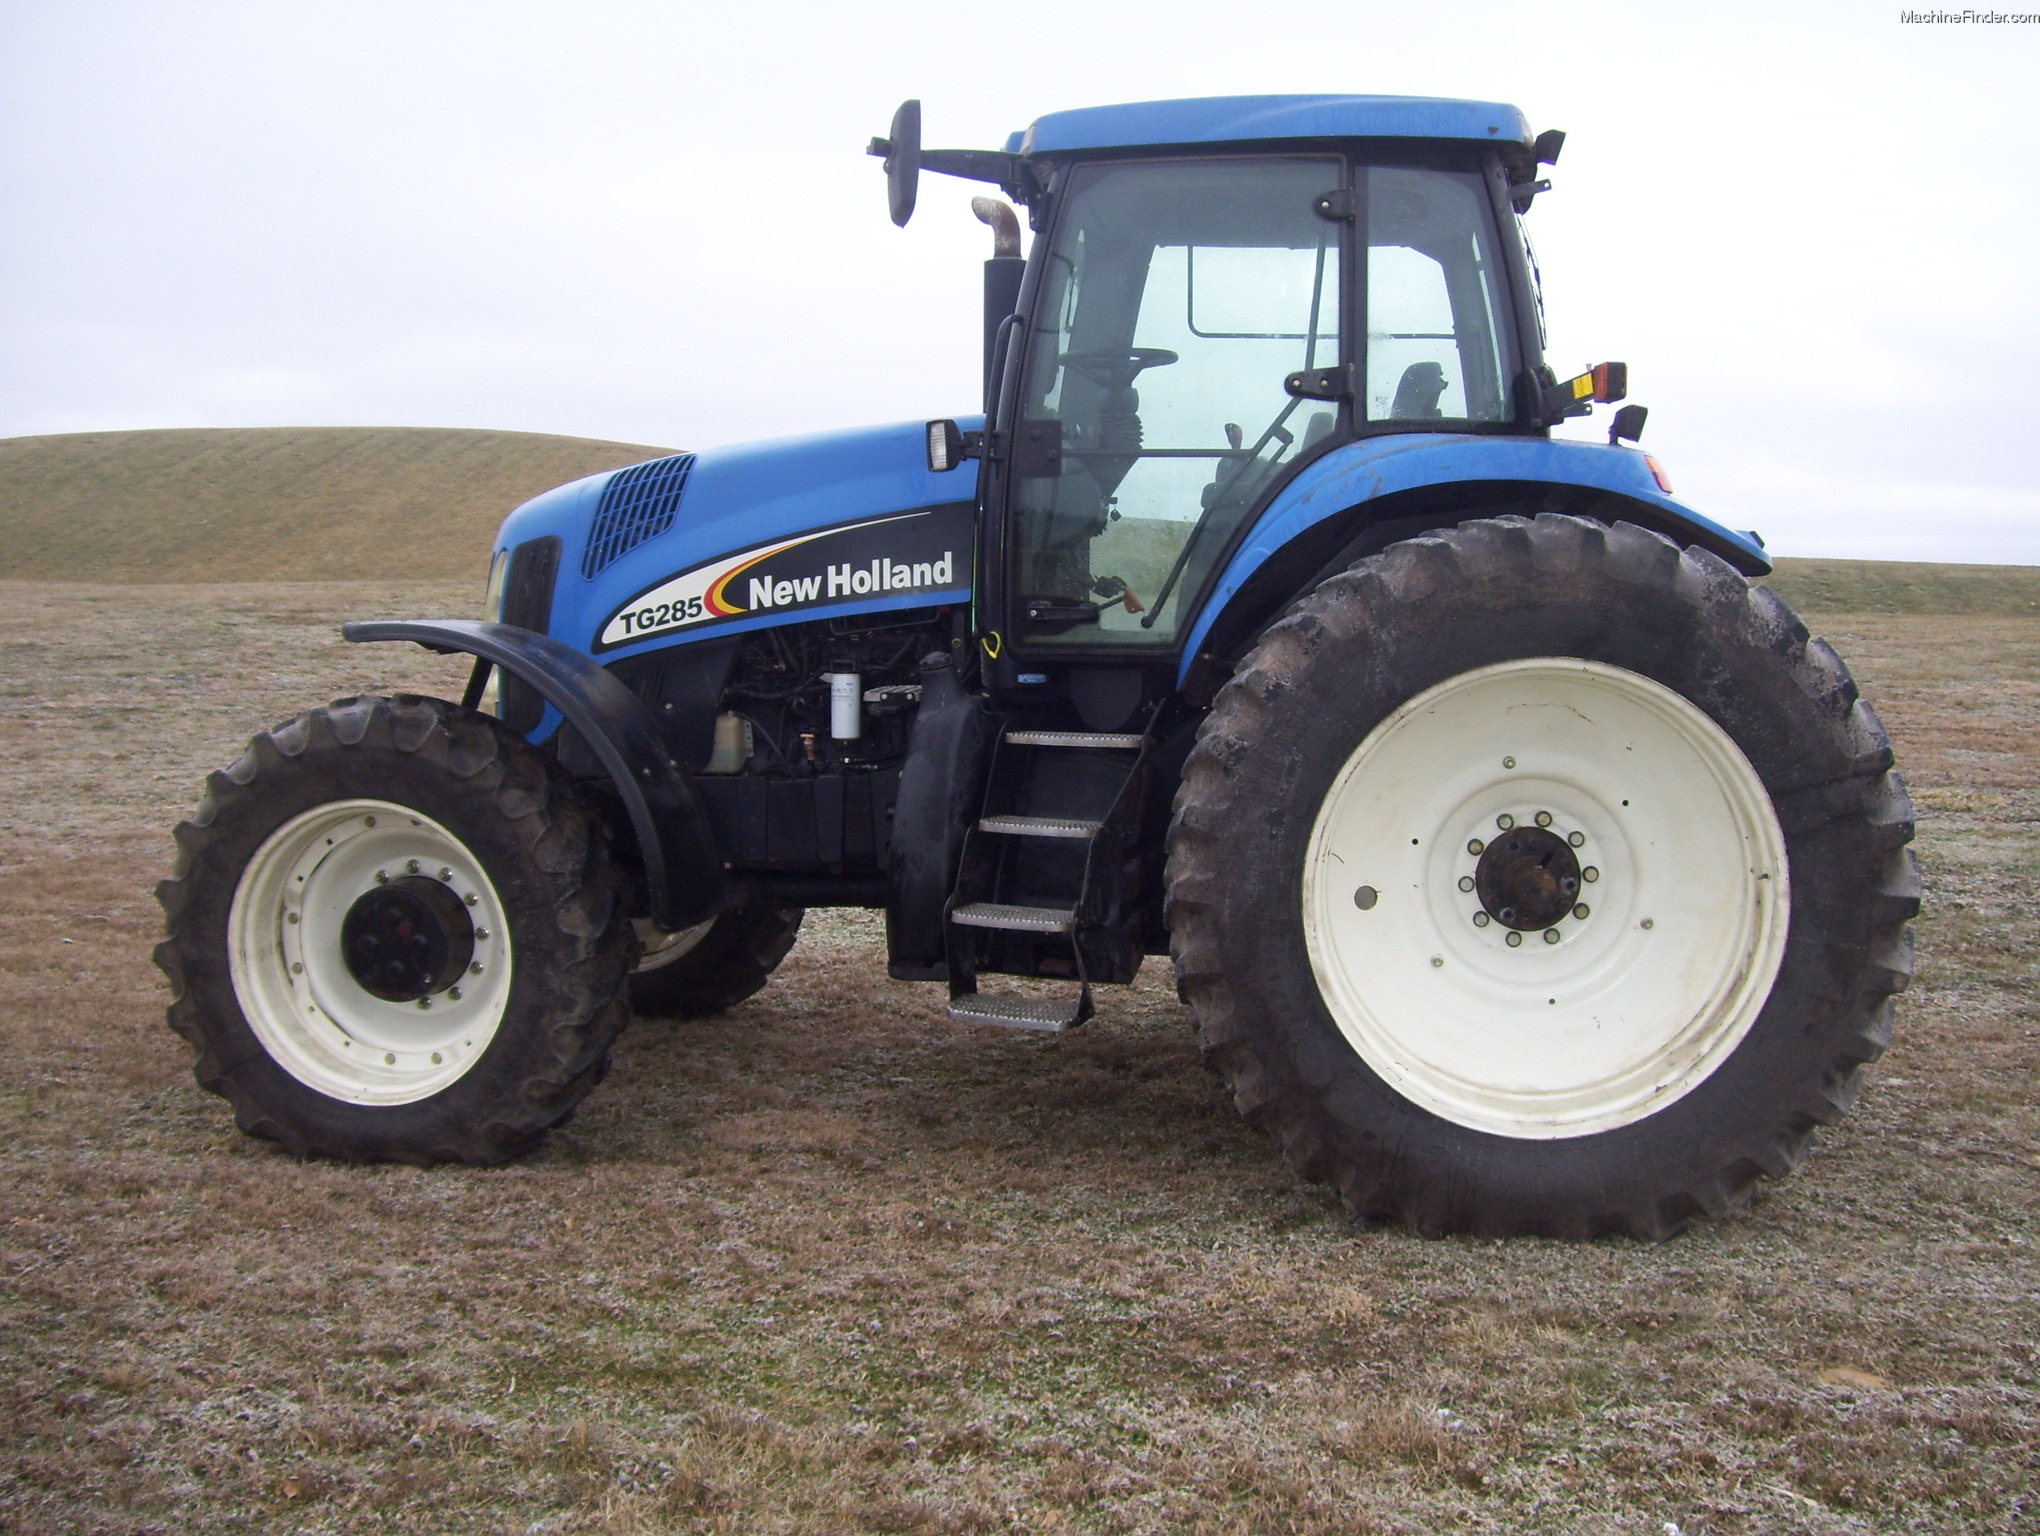 New Holland TG285:picture # 15, reviews, news, specs, buy car